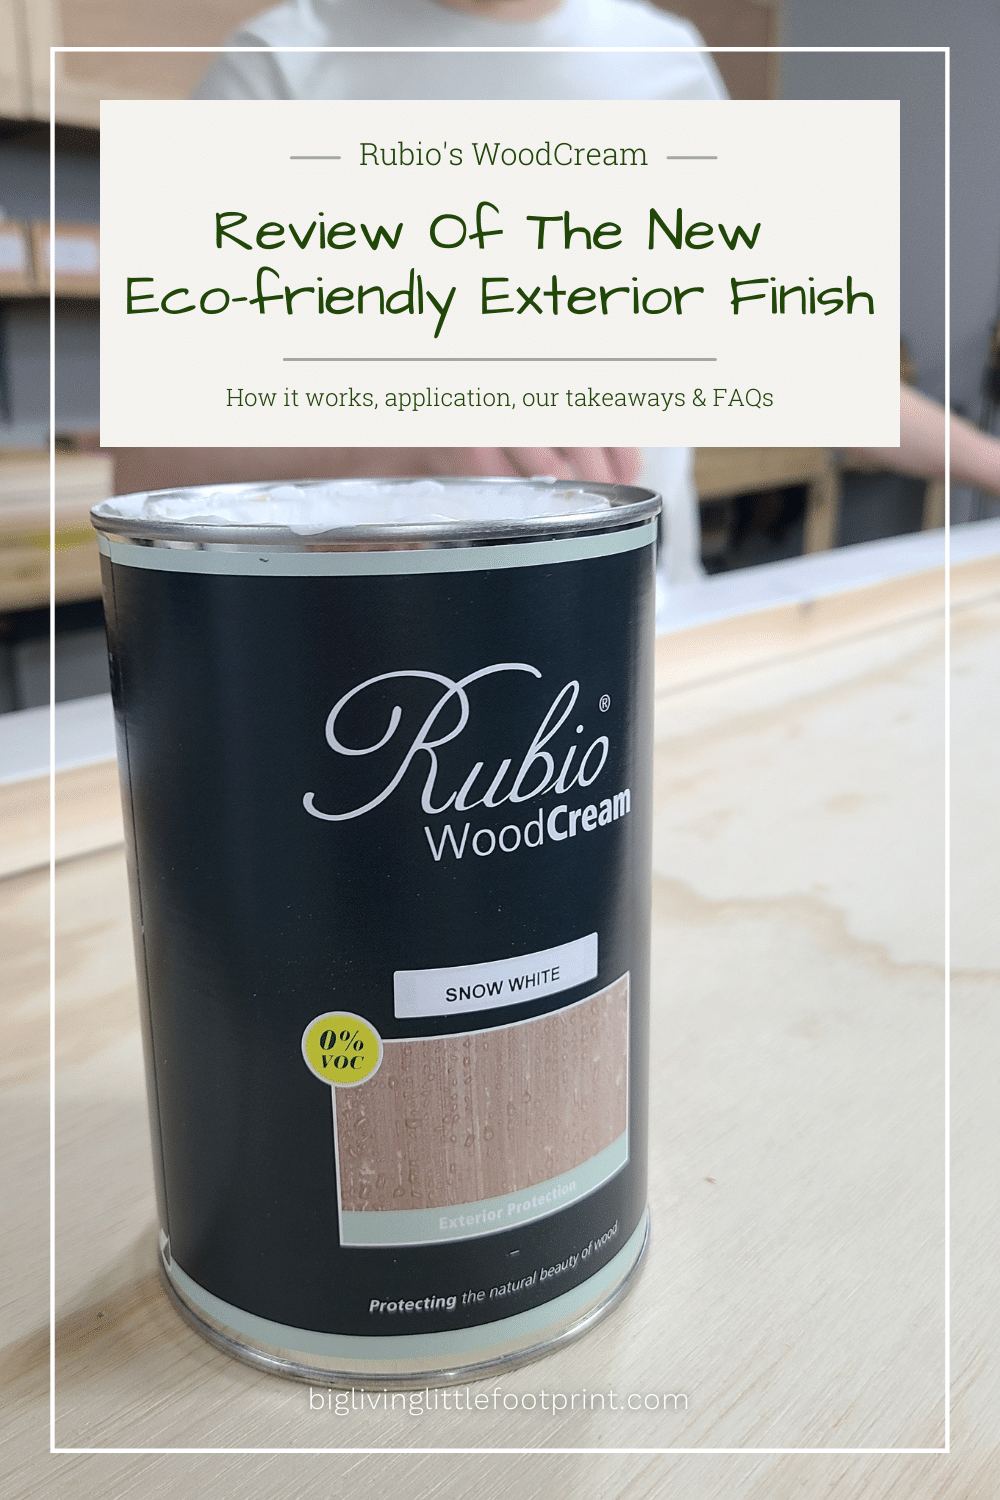 Rubio’s WoodCream: Review Of The New Eco-Friendly Exterior Finish